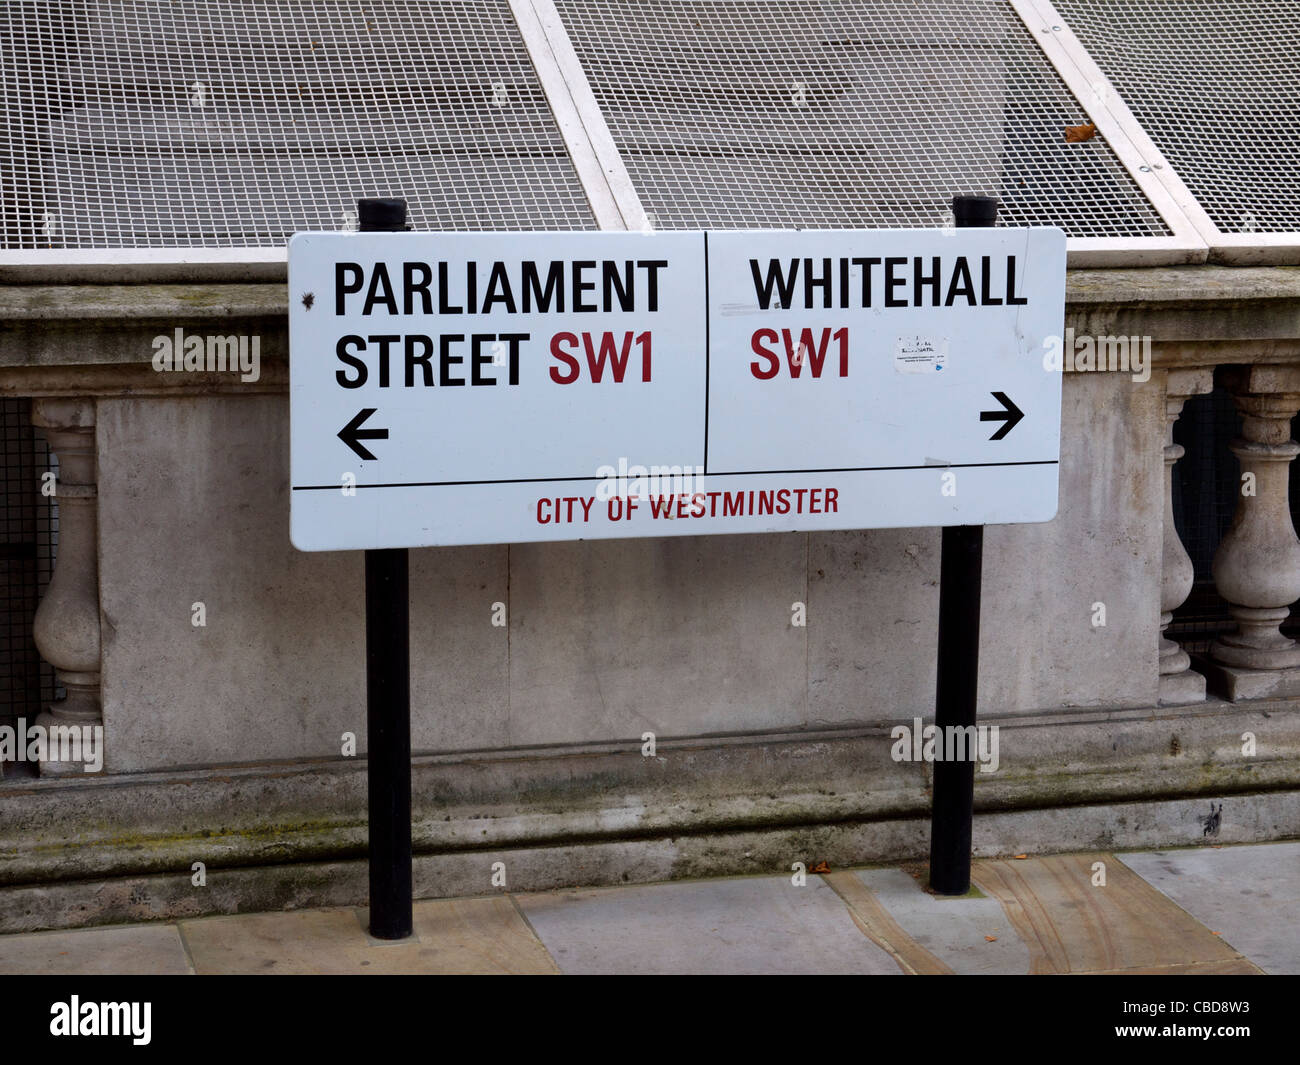 City of Westminster road sign showing Parliament Street and Whitehall Stock Photo